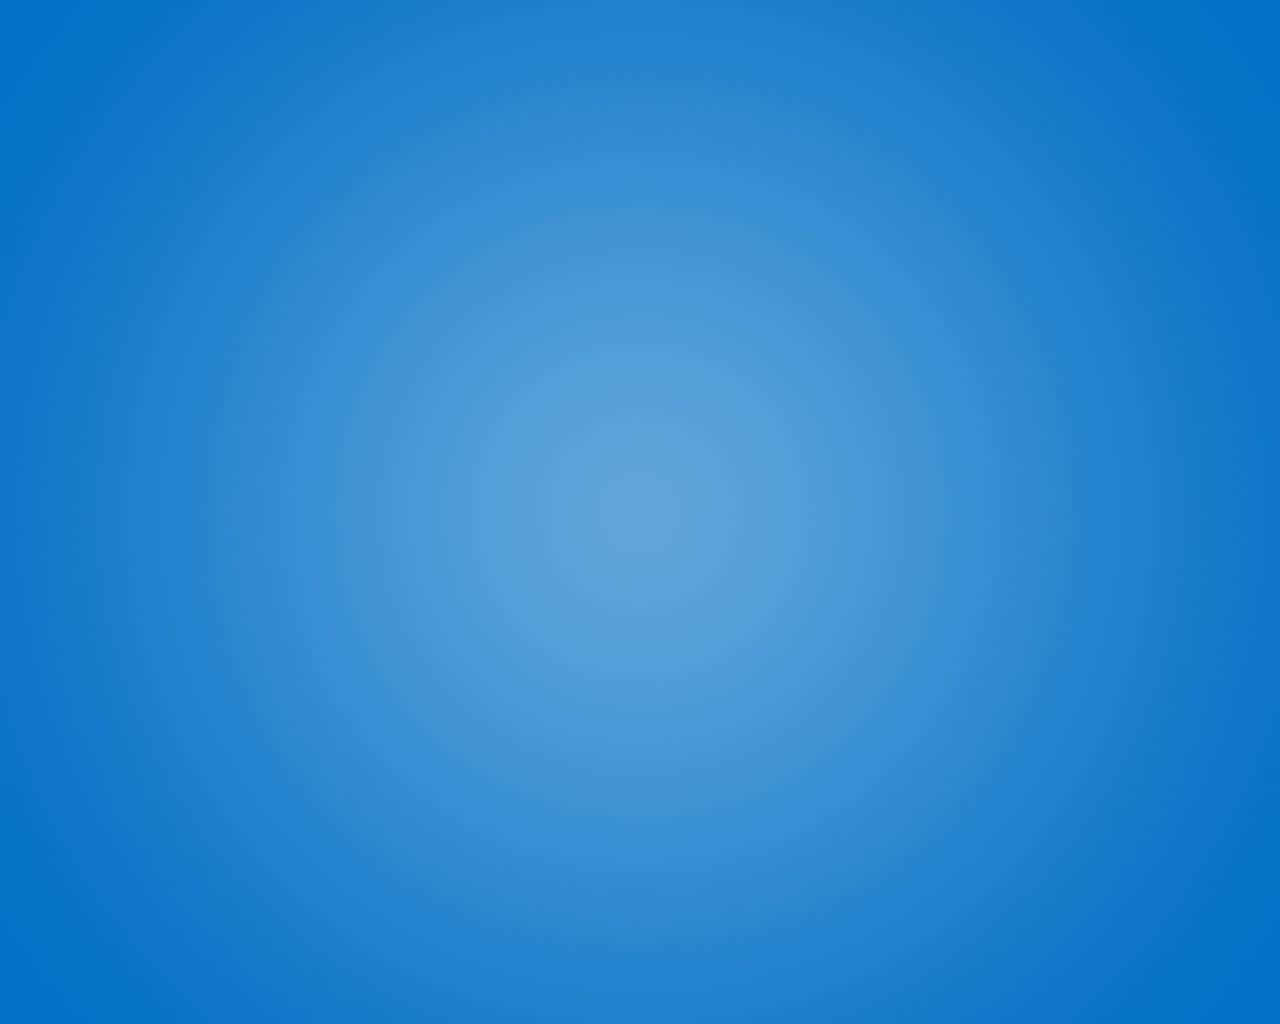 A Blue Background With A White Circle In The Middle